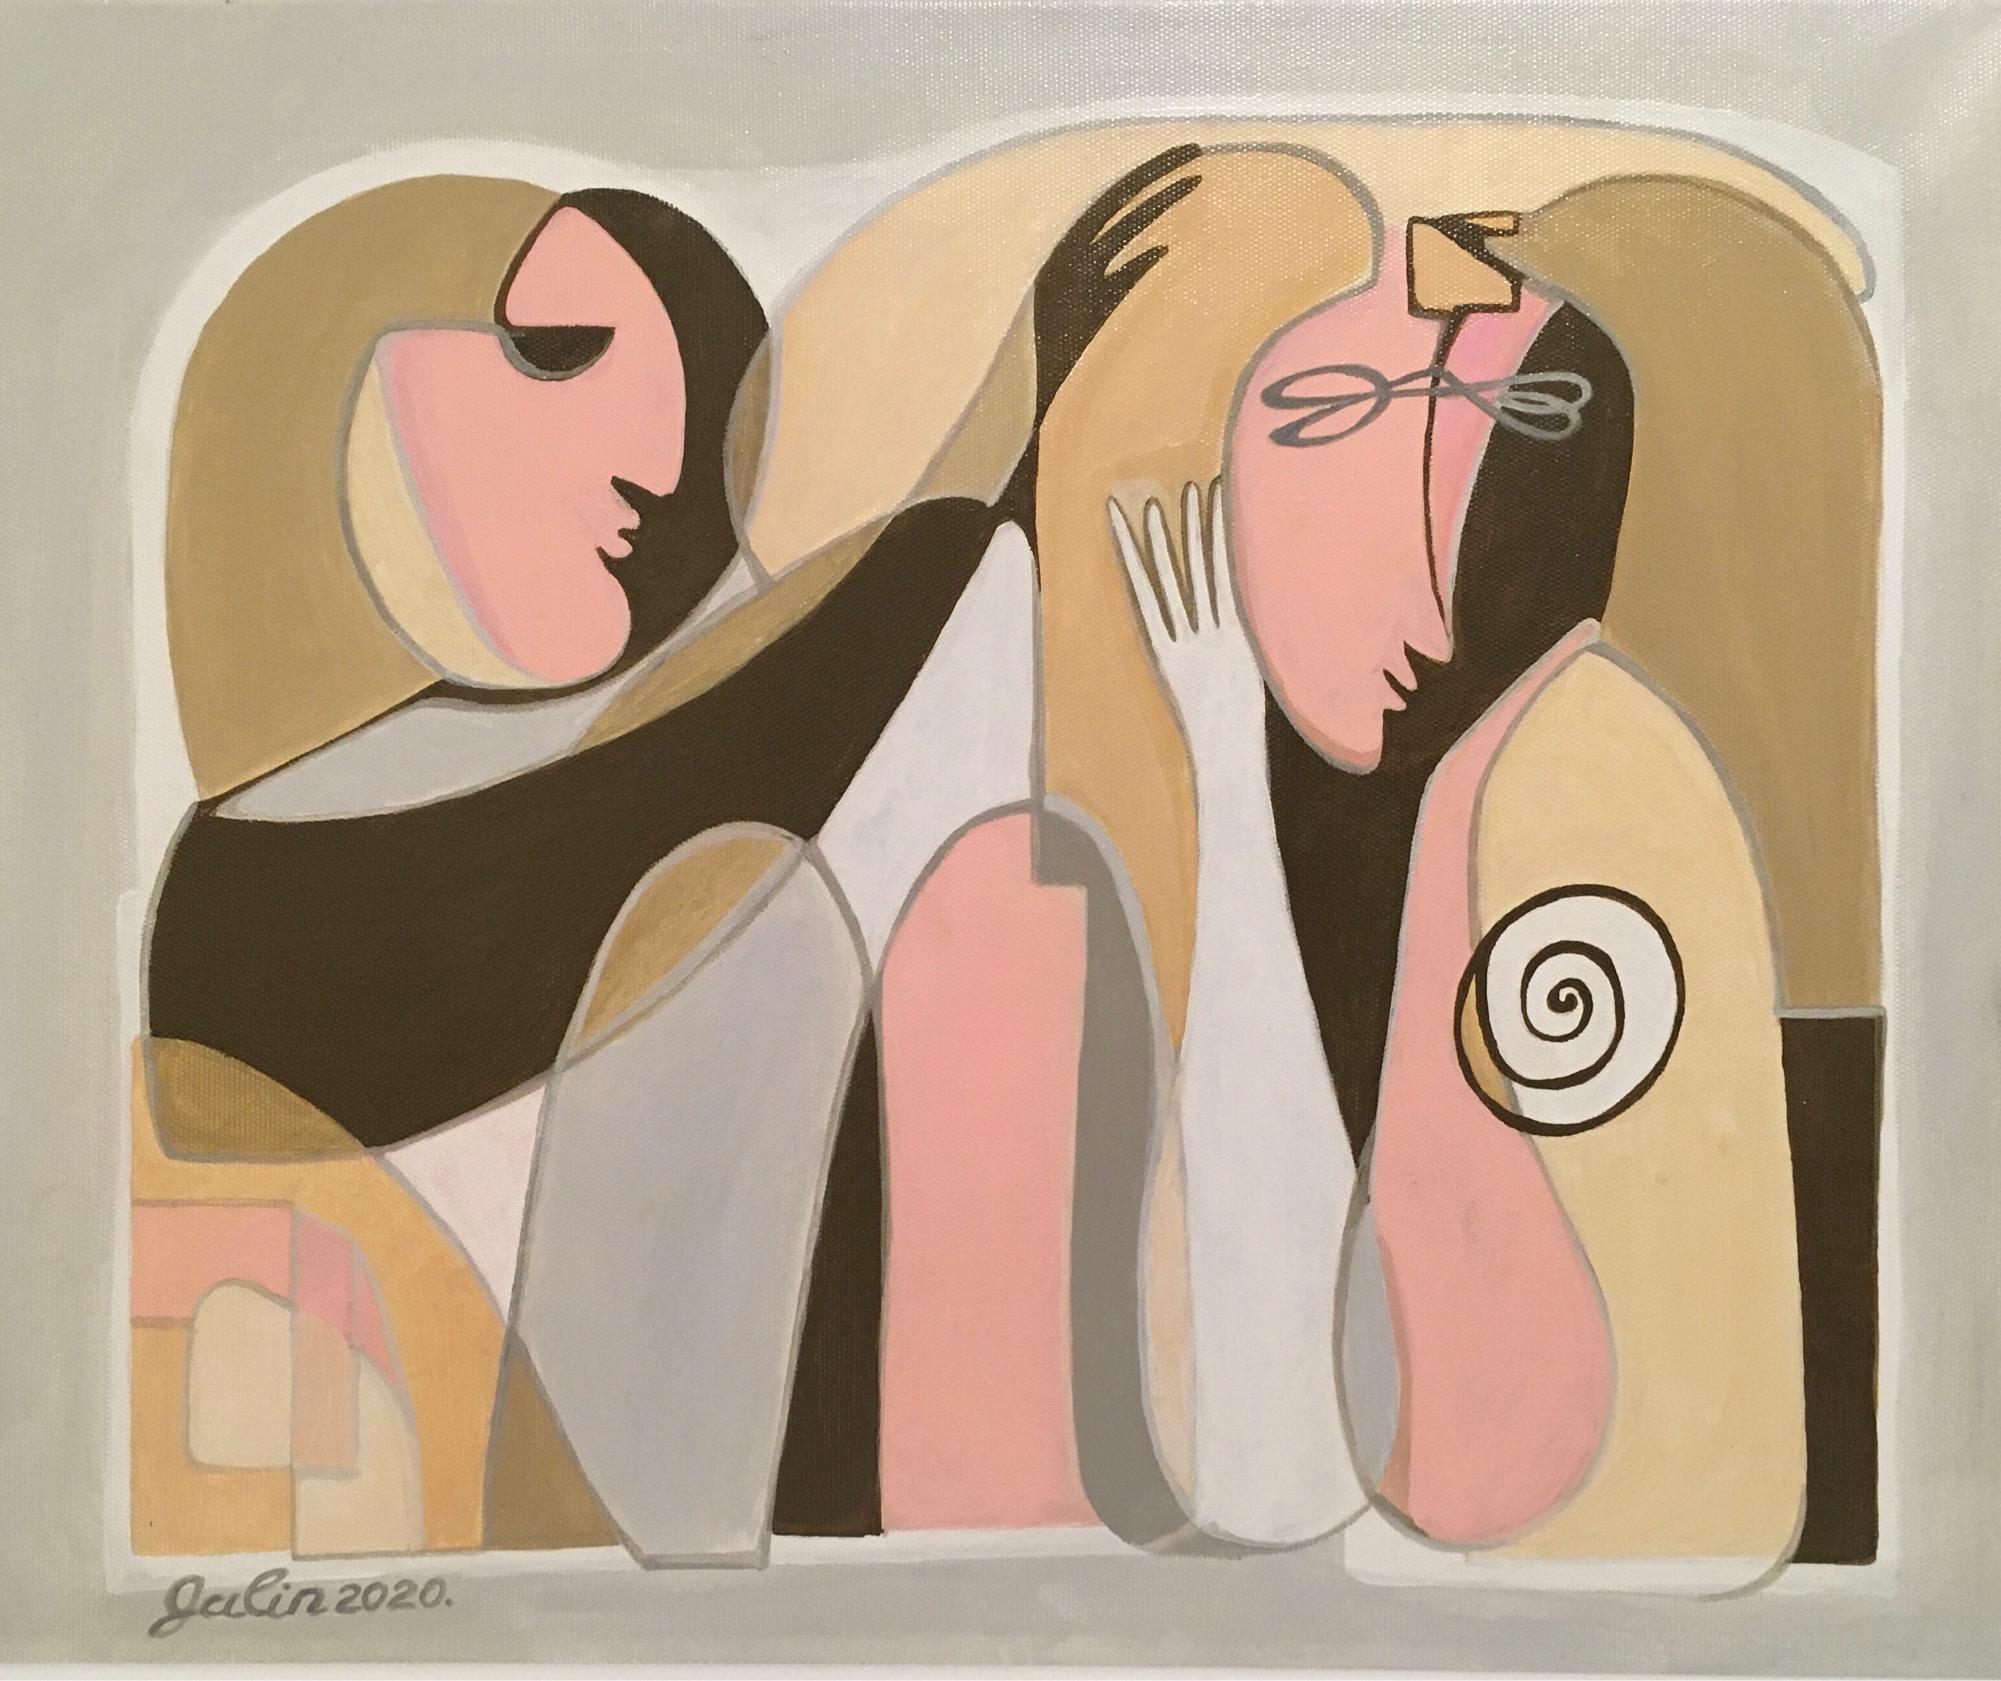 Flirt-abstraction art, made in grey, pale pink, brown, ochre, beige color